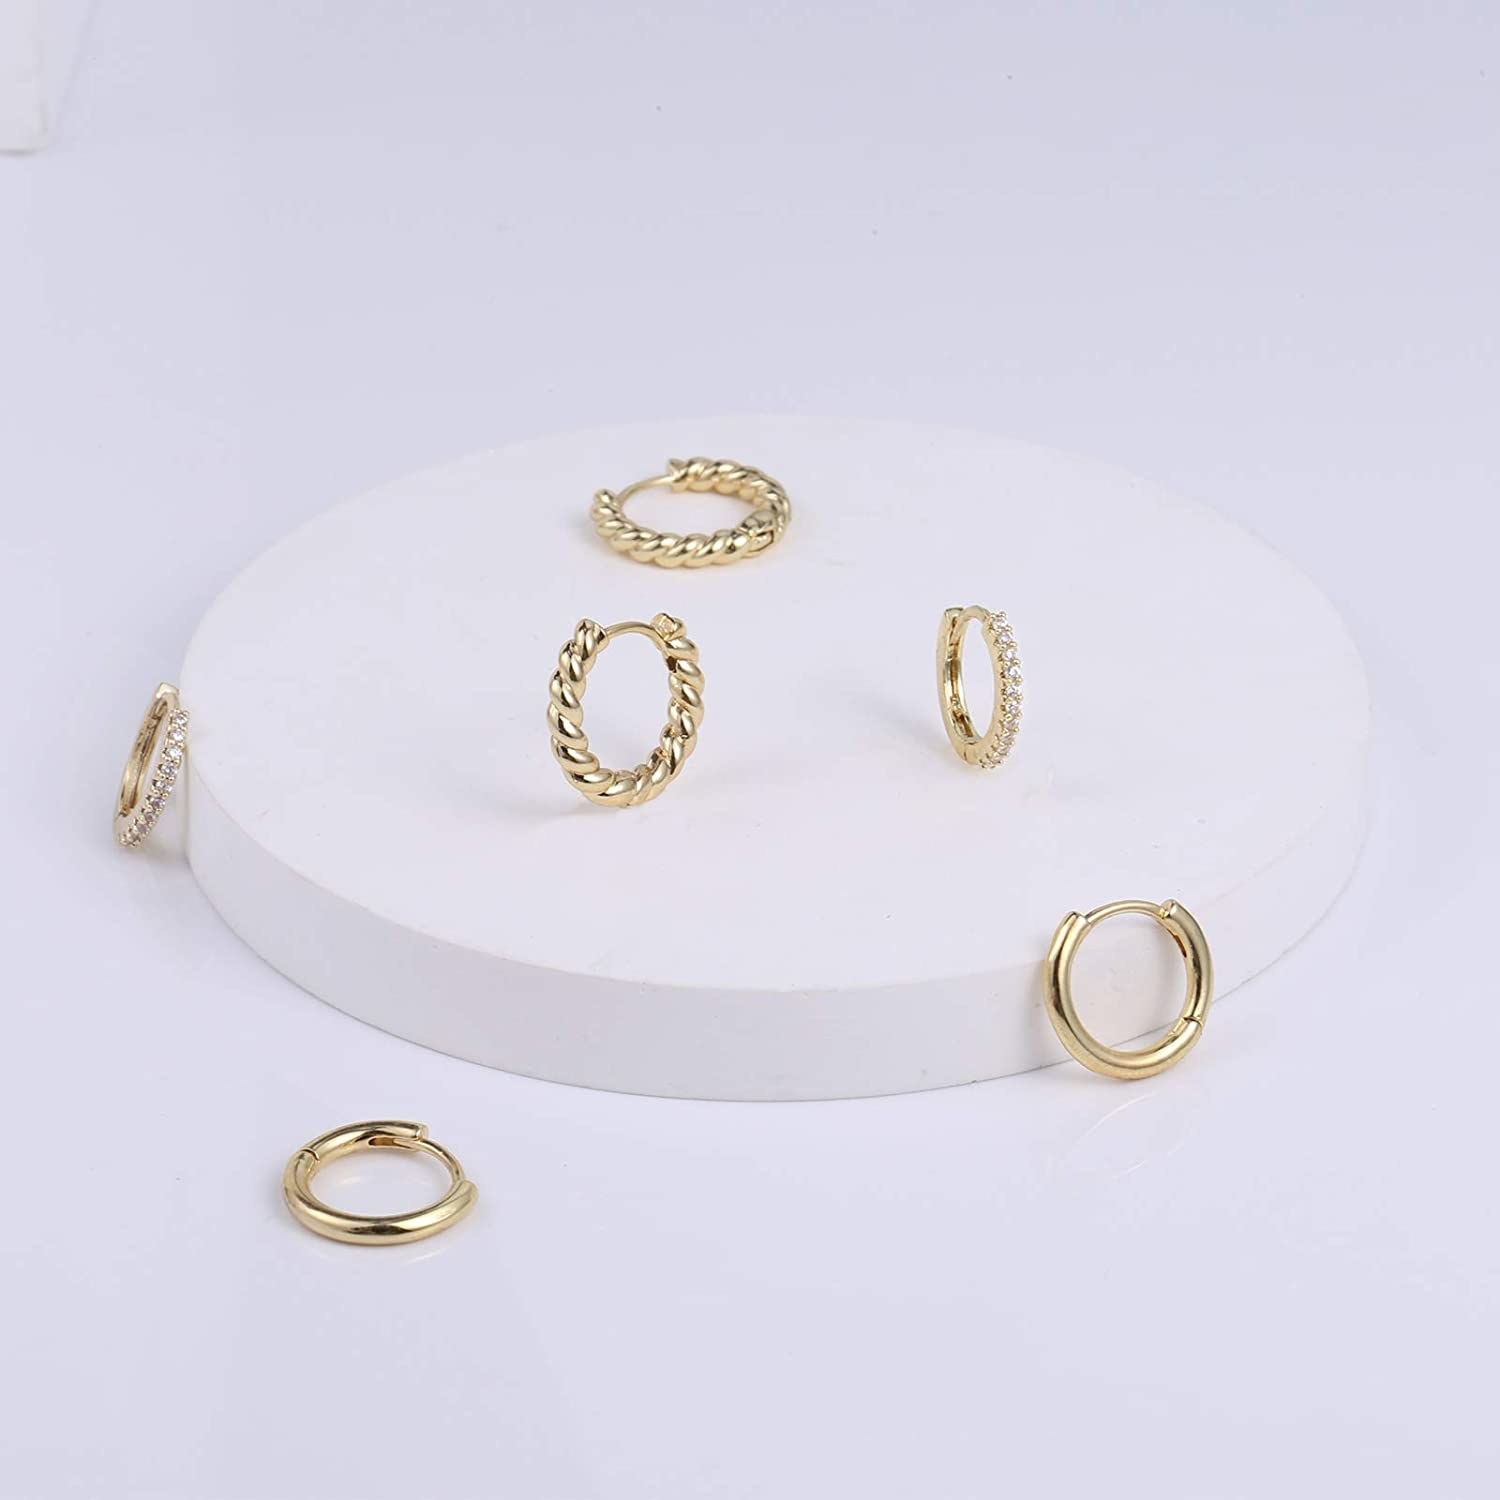 Three sets of huggie hoop earrings against a circular piece on top of a counter